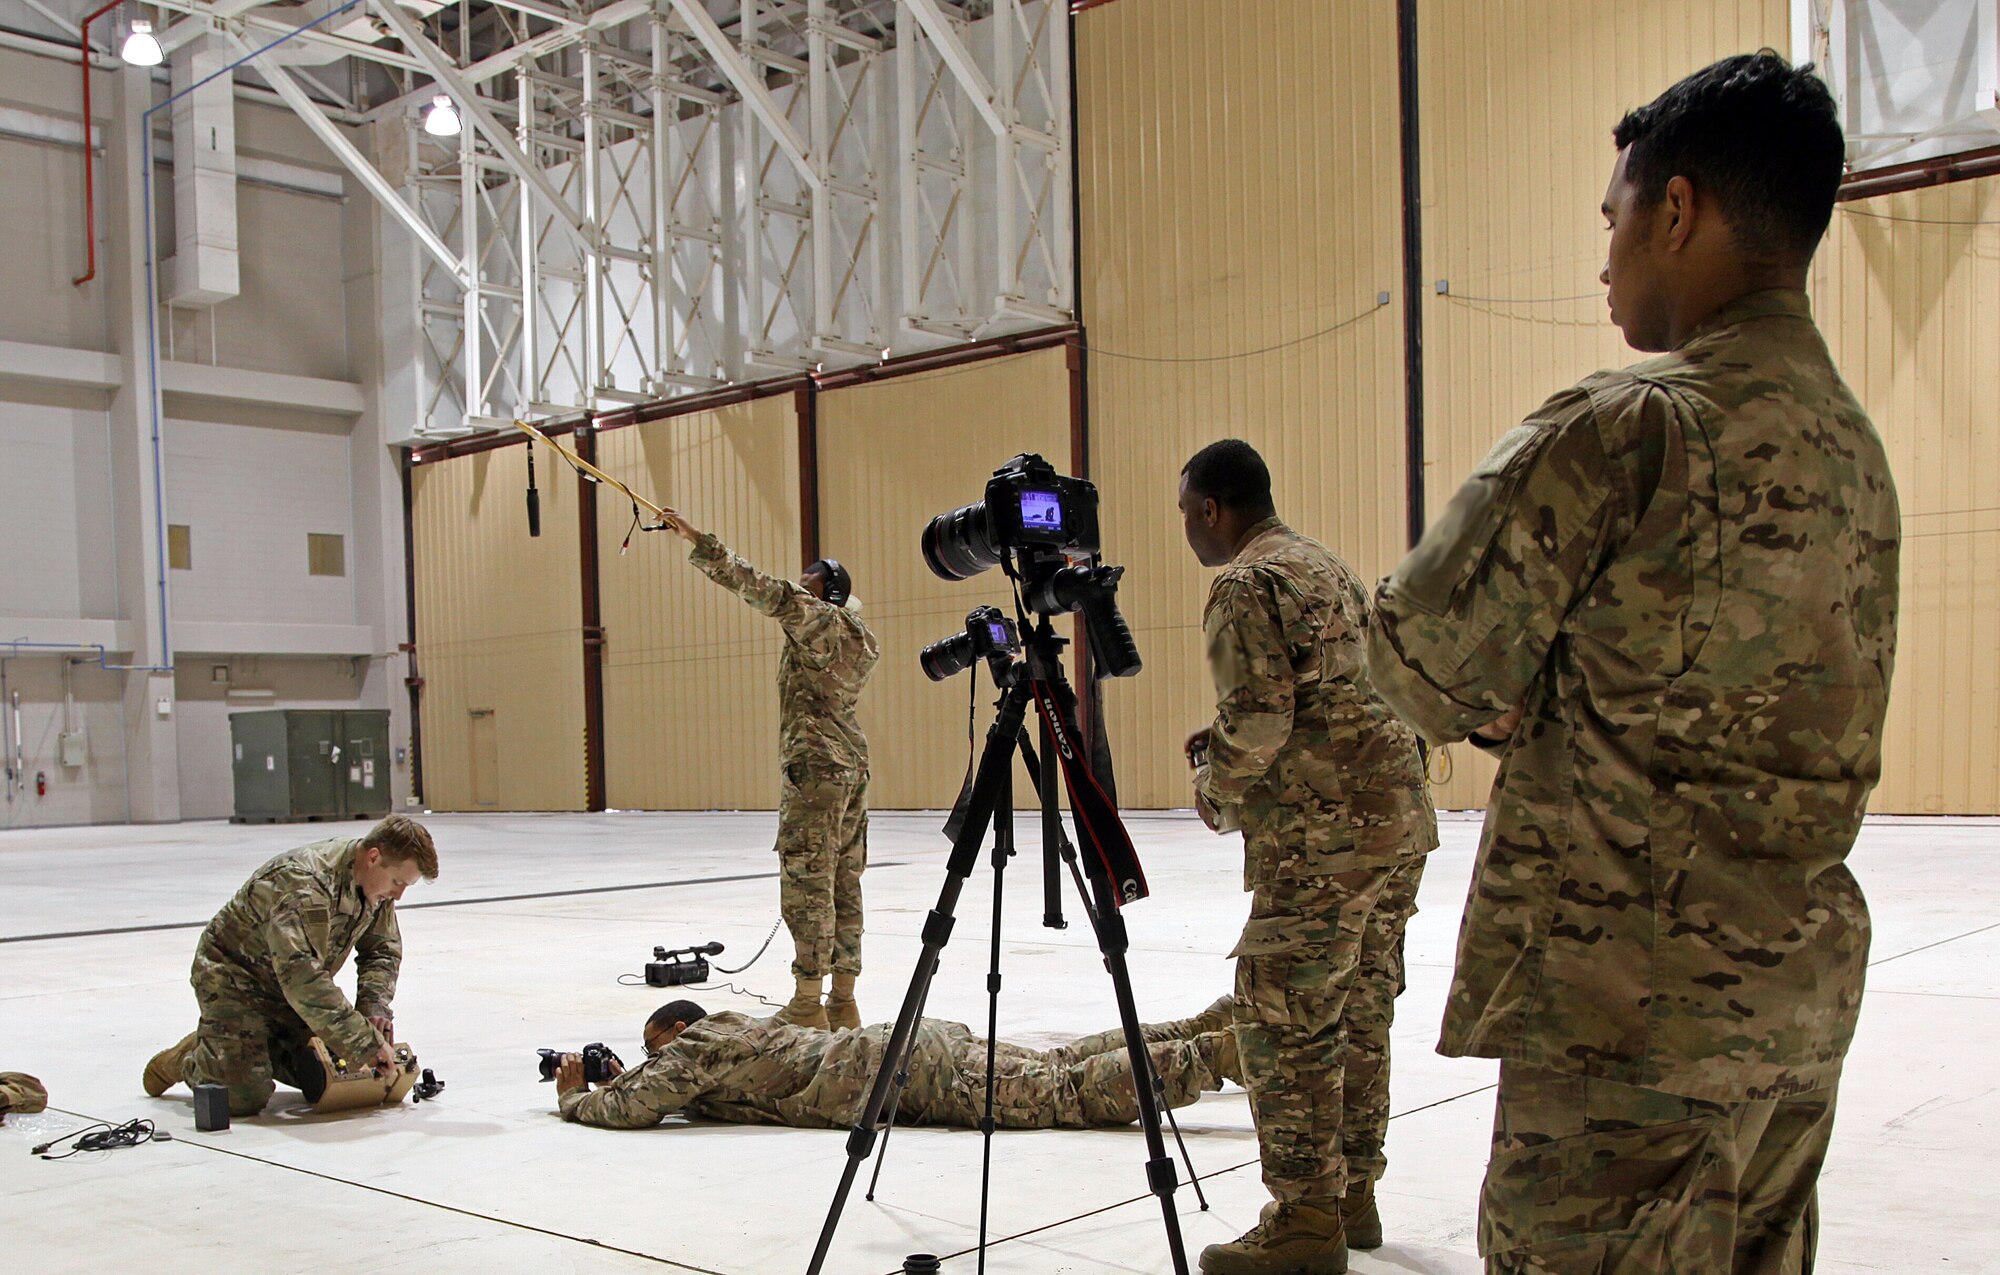 U.S. Army Soldiers assigned to the Military Information Support Task Force-Central (MISTF-C) Production Development Detachment capture a Psychological Operations Specialist setting up a Next Generation Loudspeaker System on Dec. 7, 2016 at Al Udeid Air Base, Qatar. (US Army Photo by Staff Sgt. Brian)